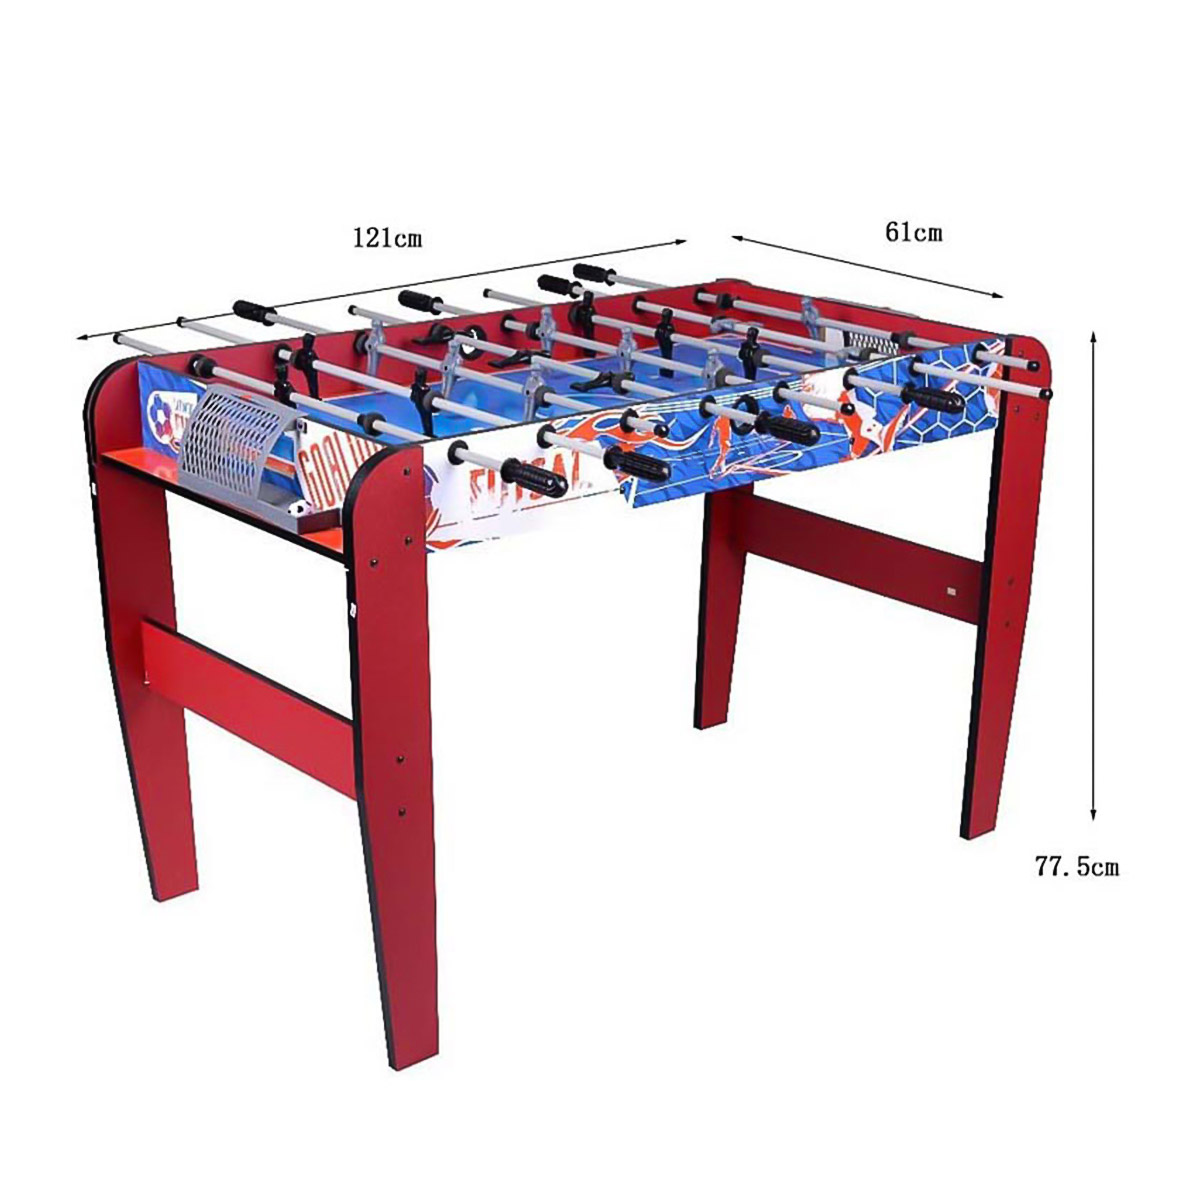 https://www.winmaxdartgame.com/table-football-4ft-foosball-table-with-8-pole-children-wooden-educational-indoor-game-toy-product/